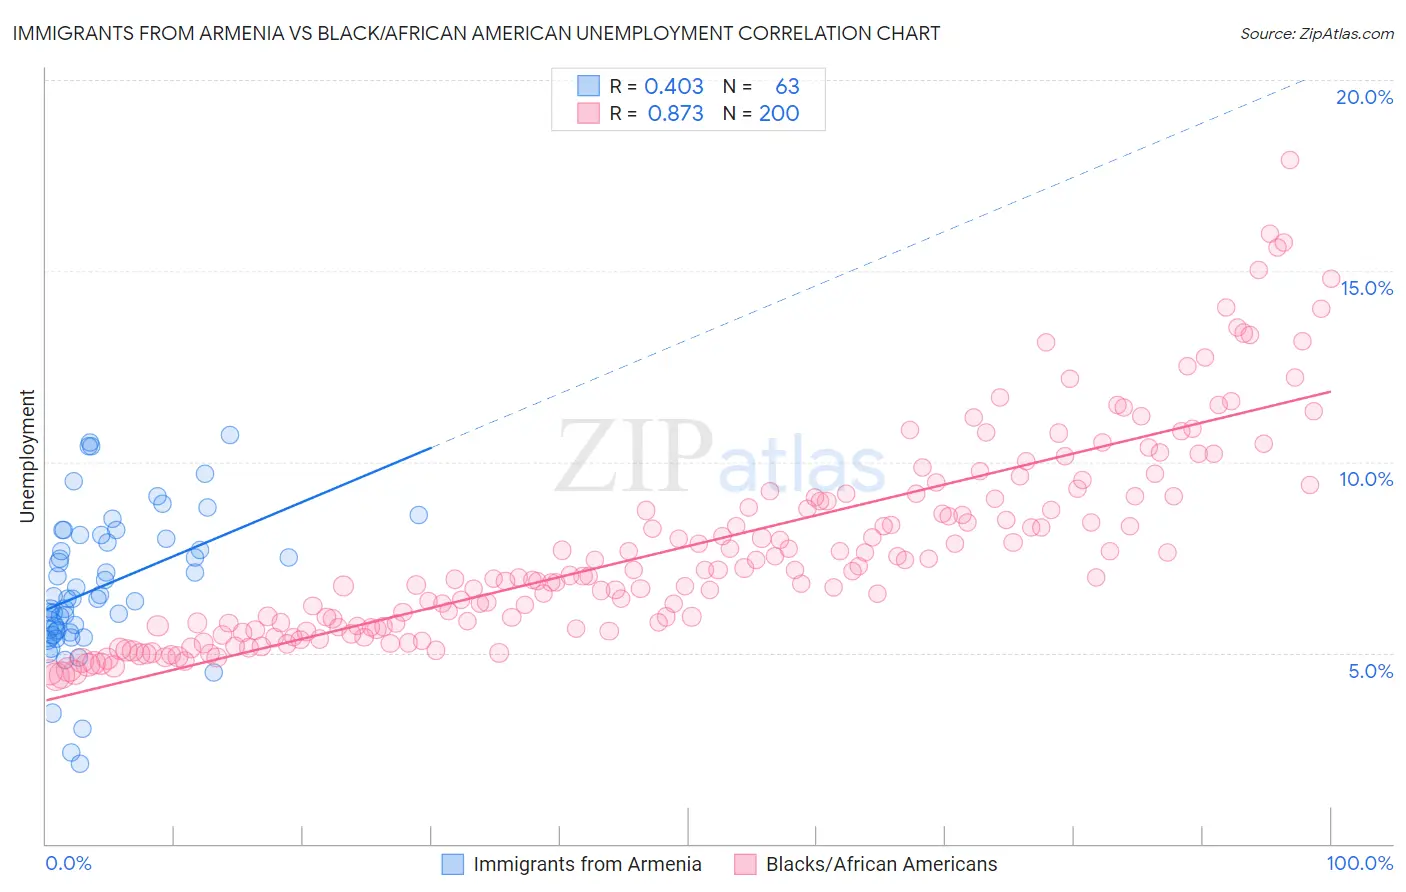 Immigrants from Armenia vs Black/African American Unemployment